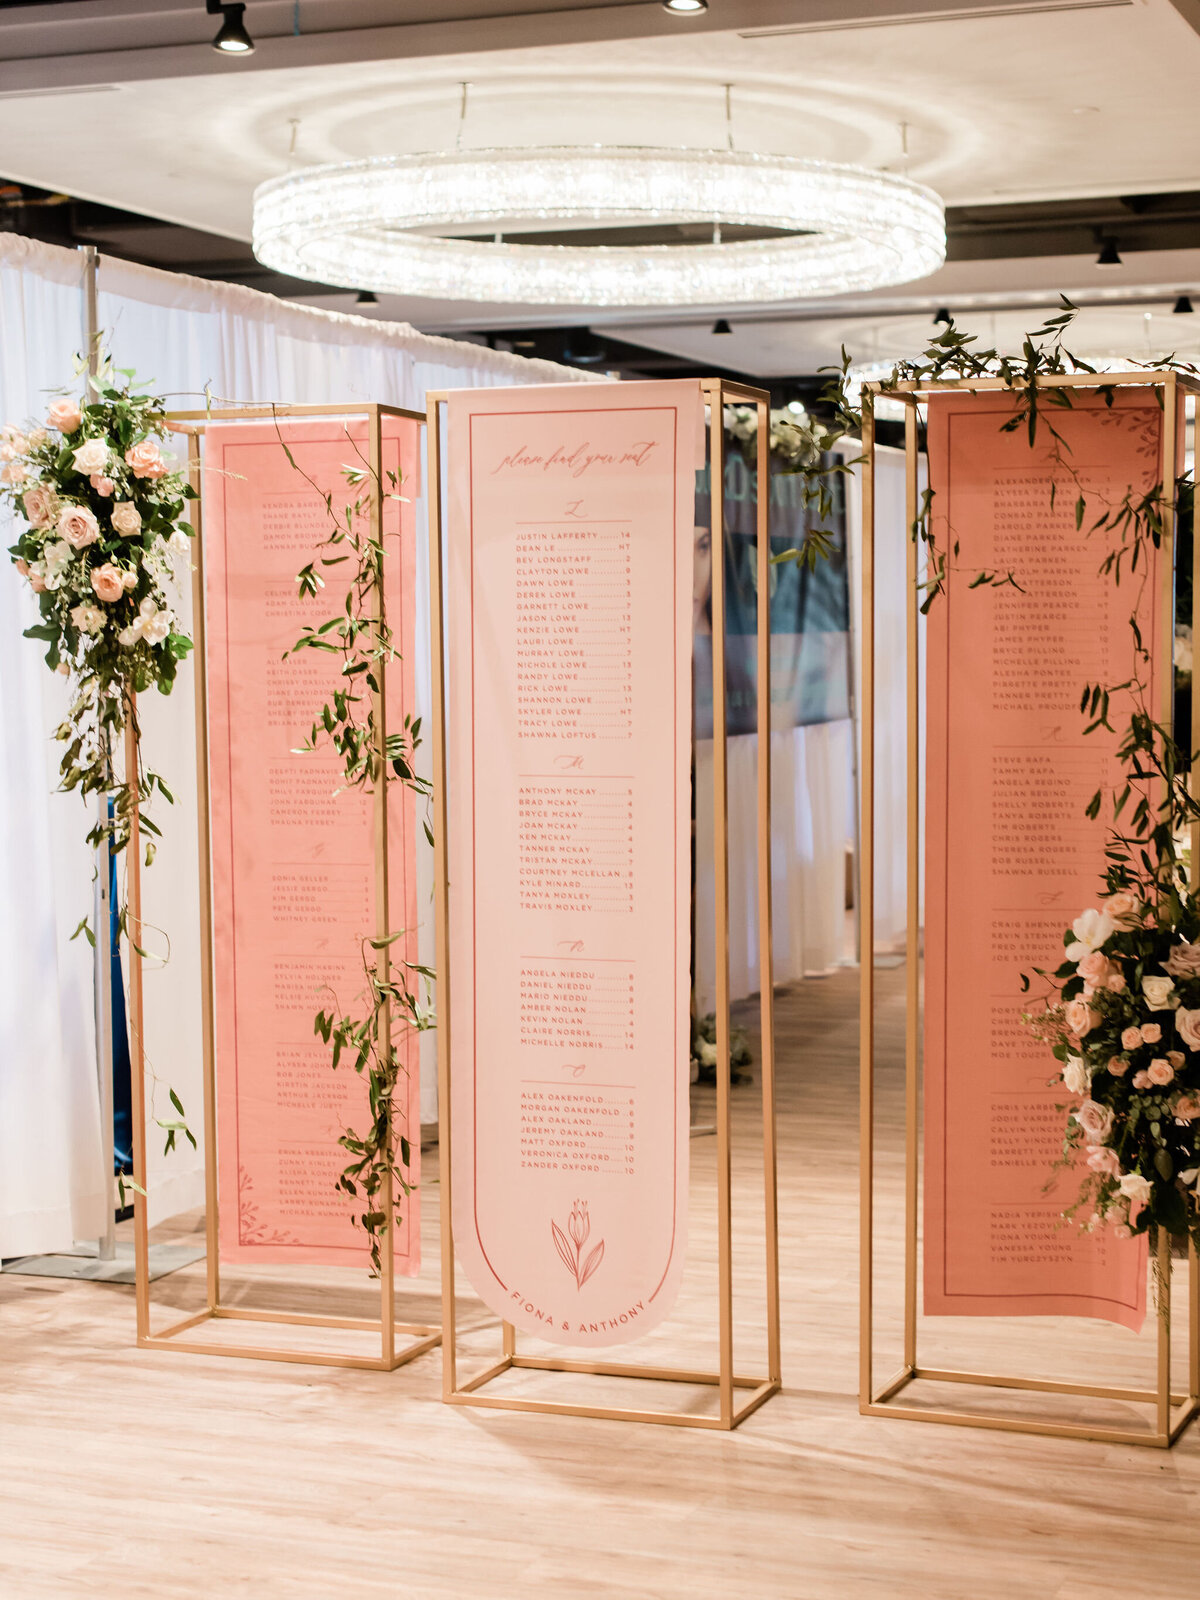 Peach, pink and rust wedding signage with copper piping by The Social Page, custom wedding invitations & signage based in Calgary, Alberta.  Featured on the Brontë Bride Vendor Guide.